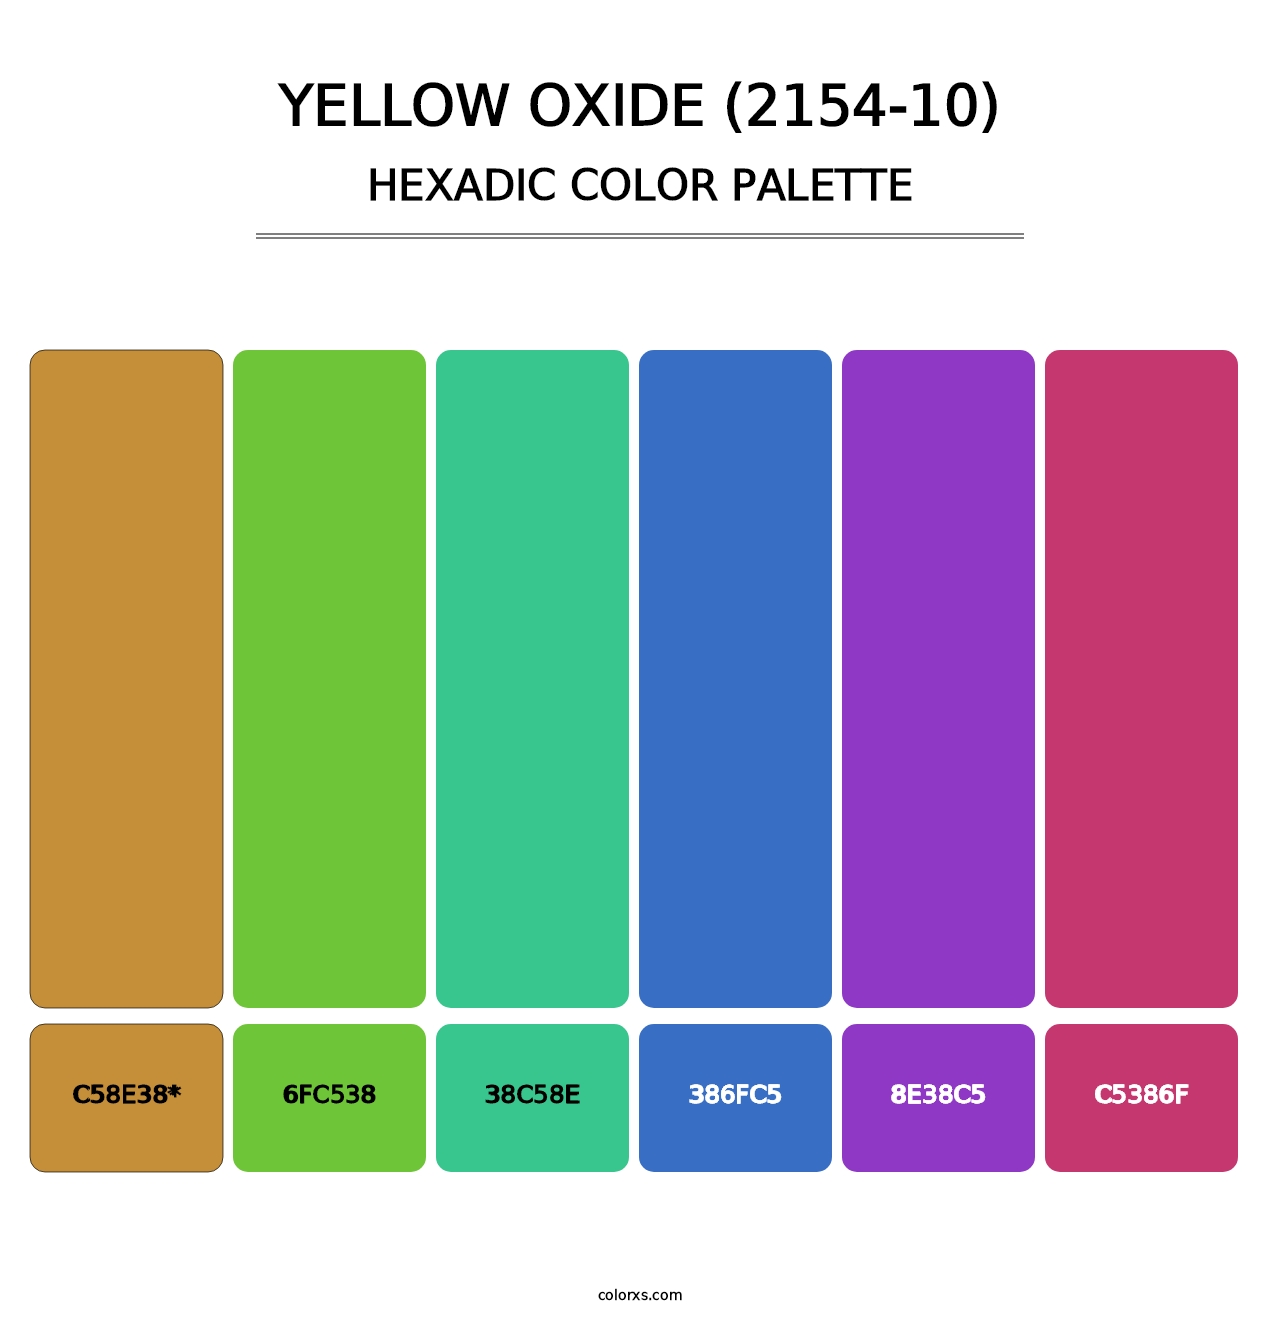 Yellow Oxide (2154-10) - Hexadic Color Palette